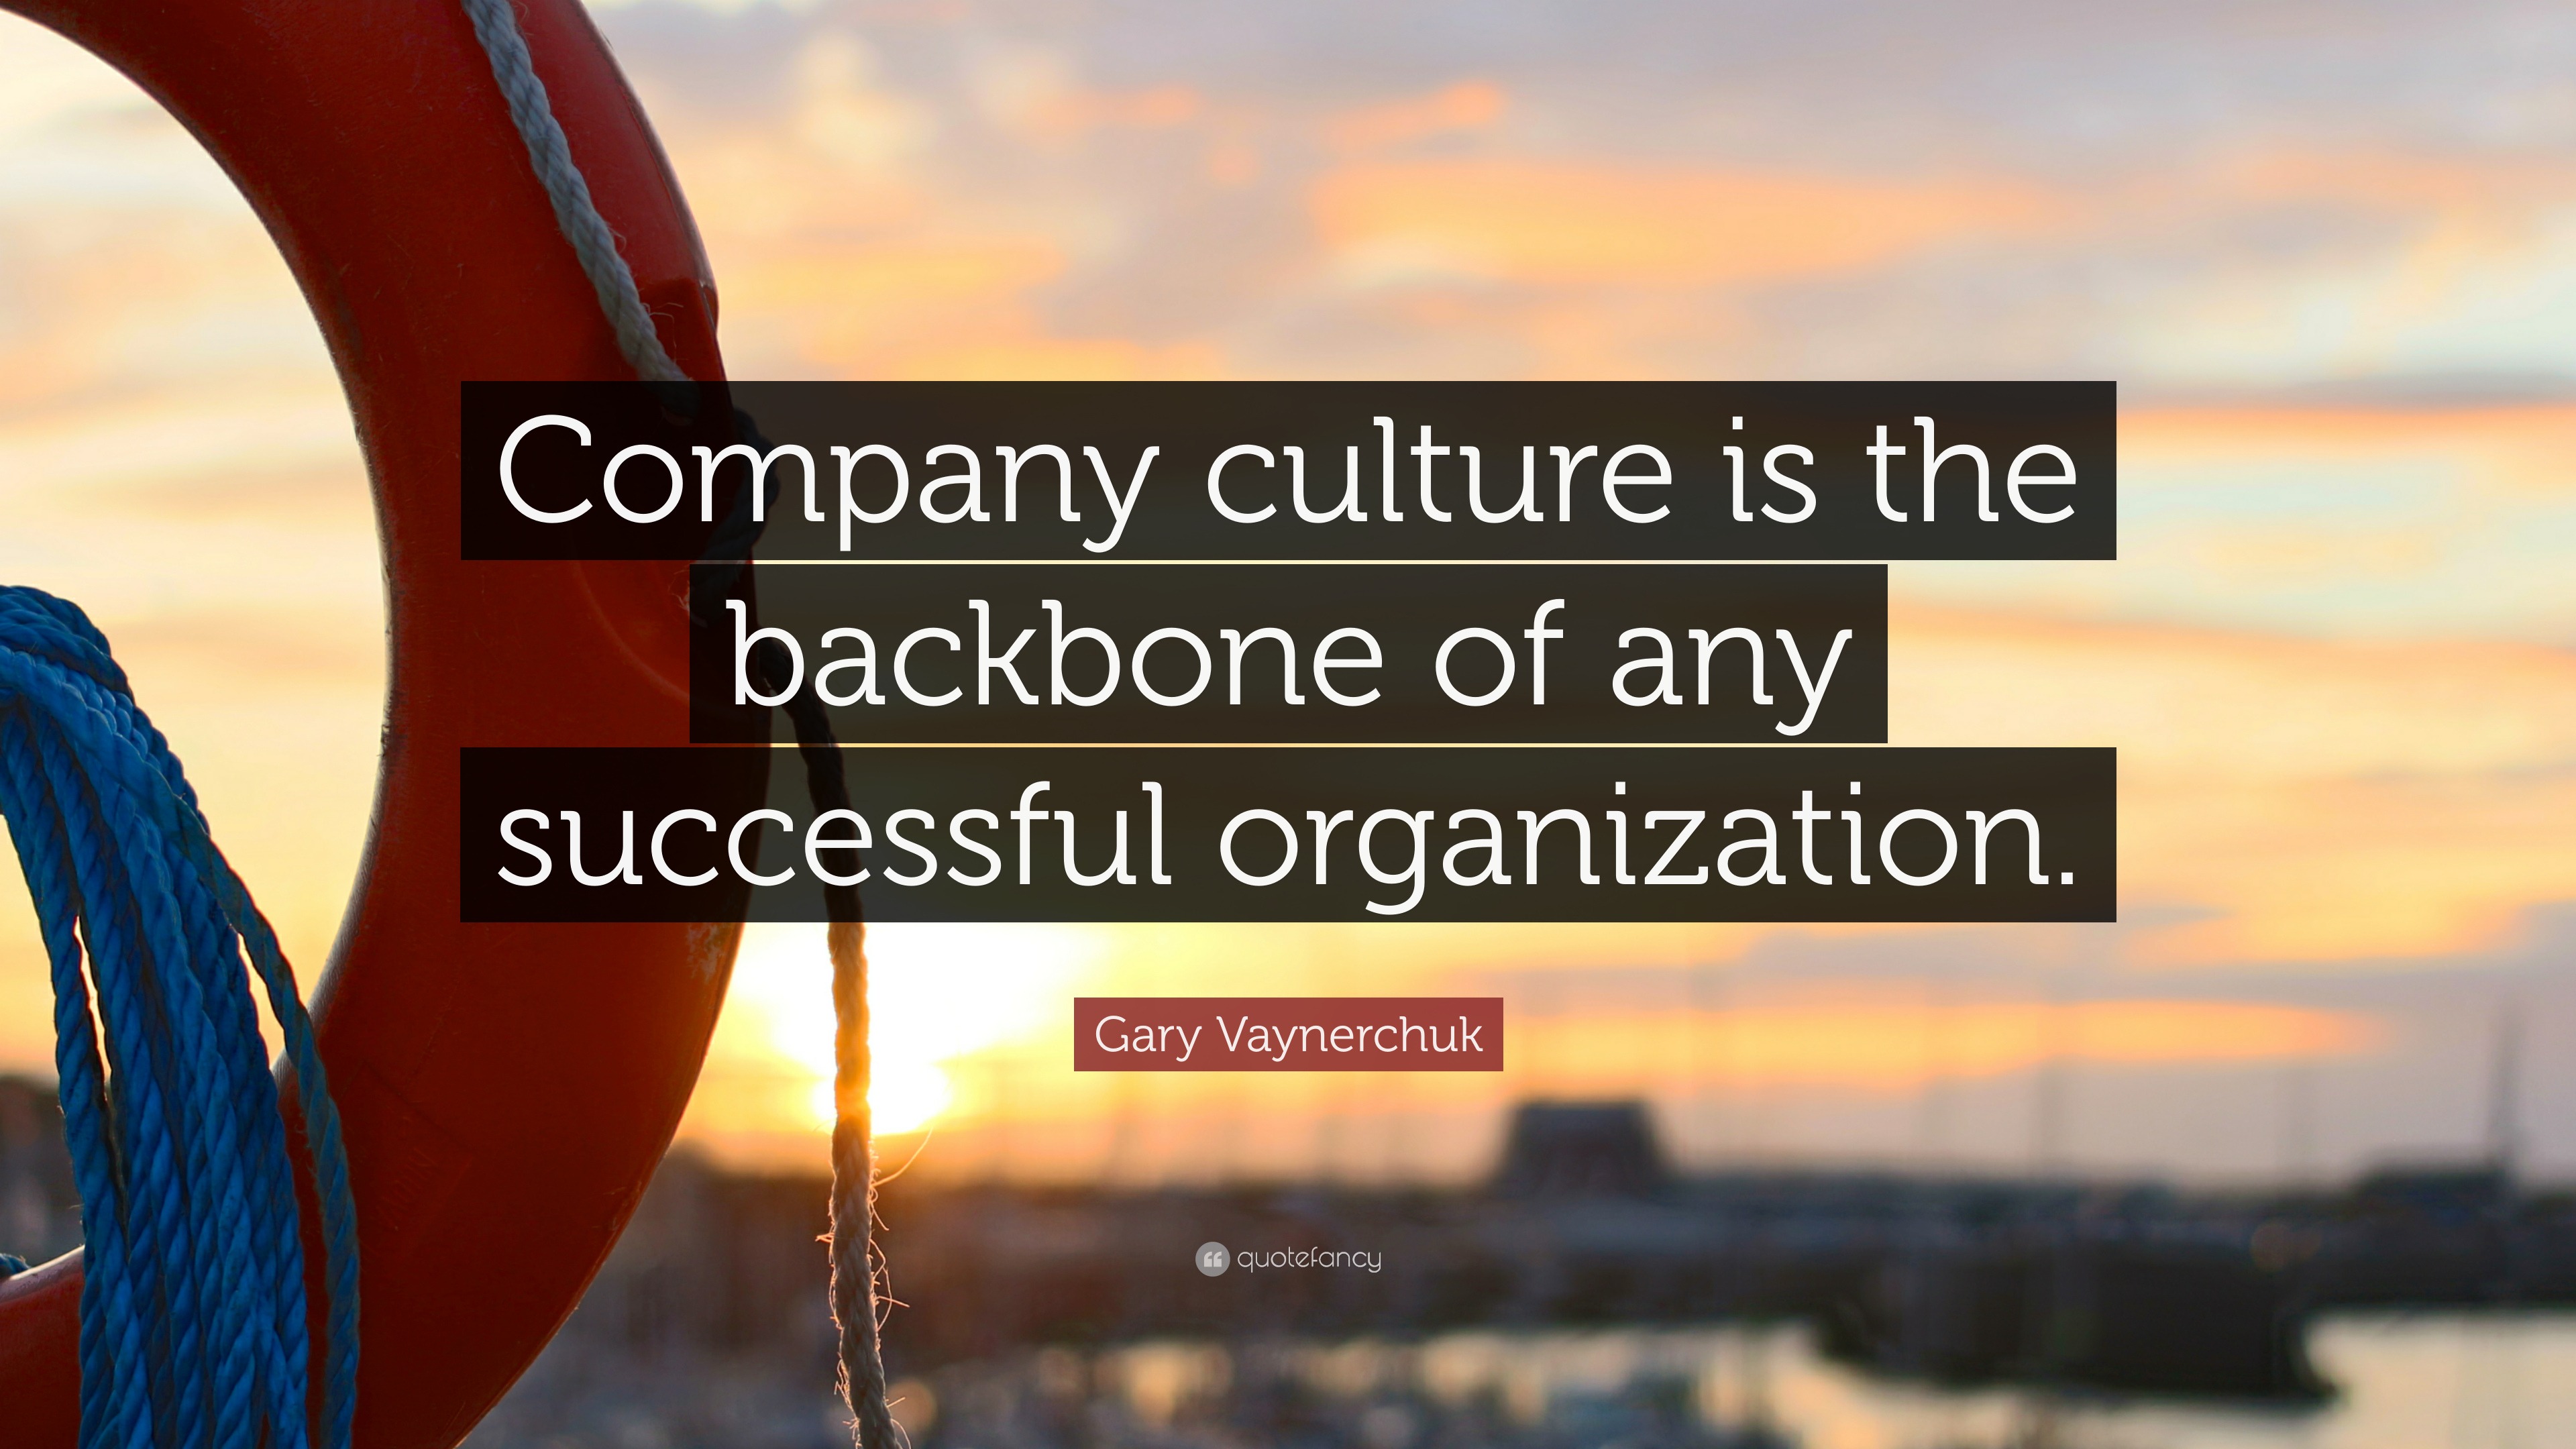 Motivational and Organizational Culture